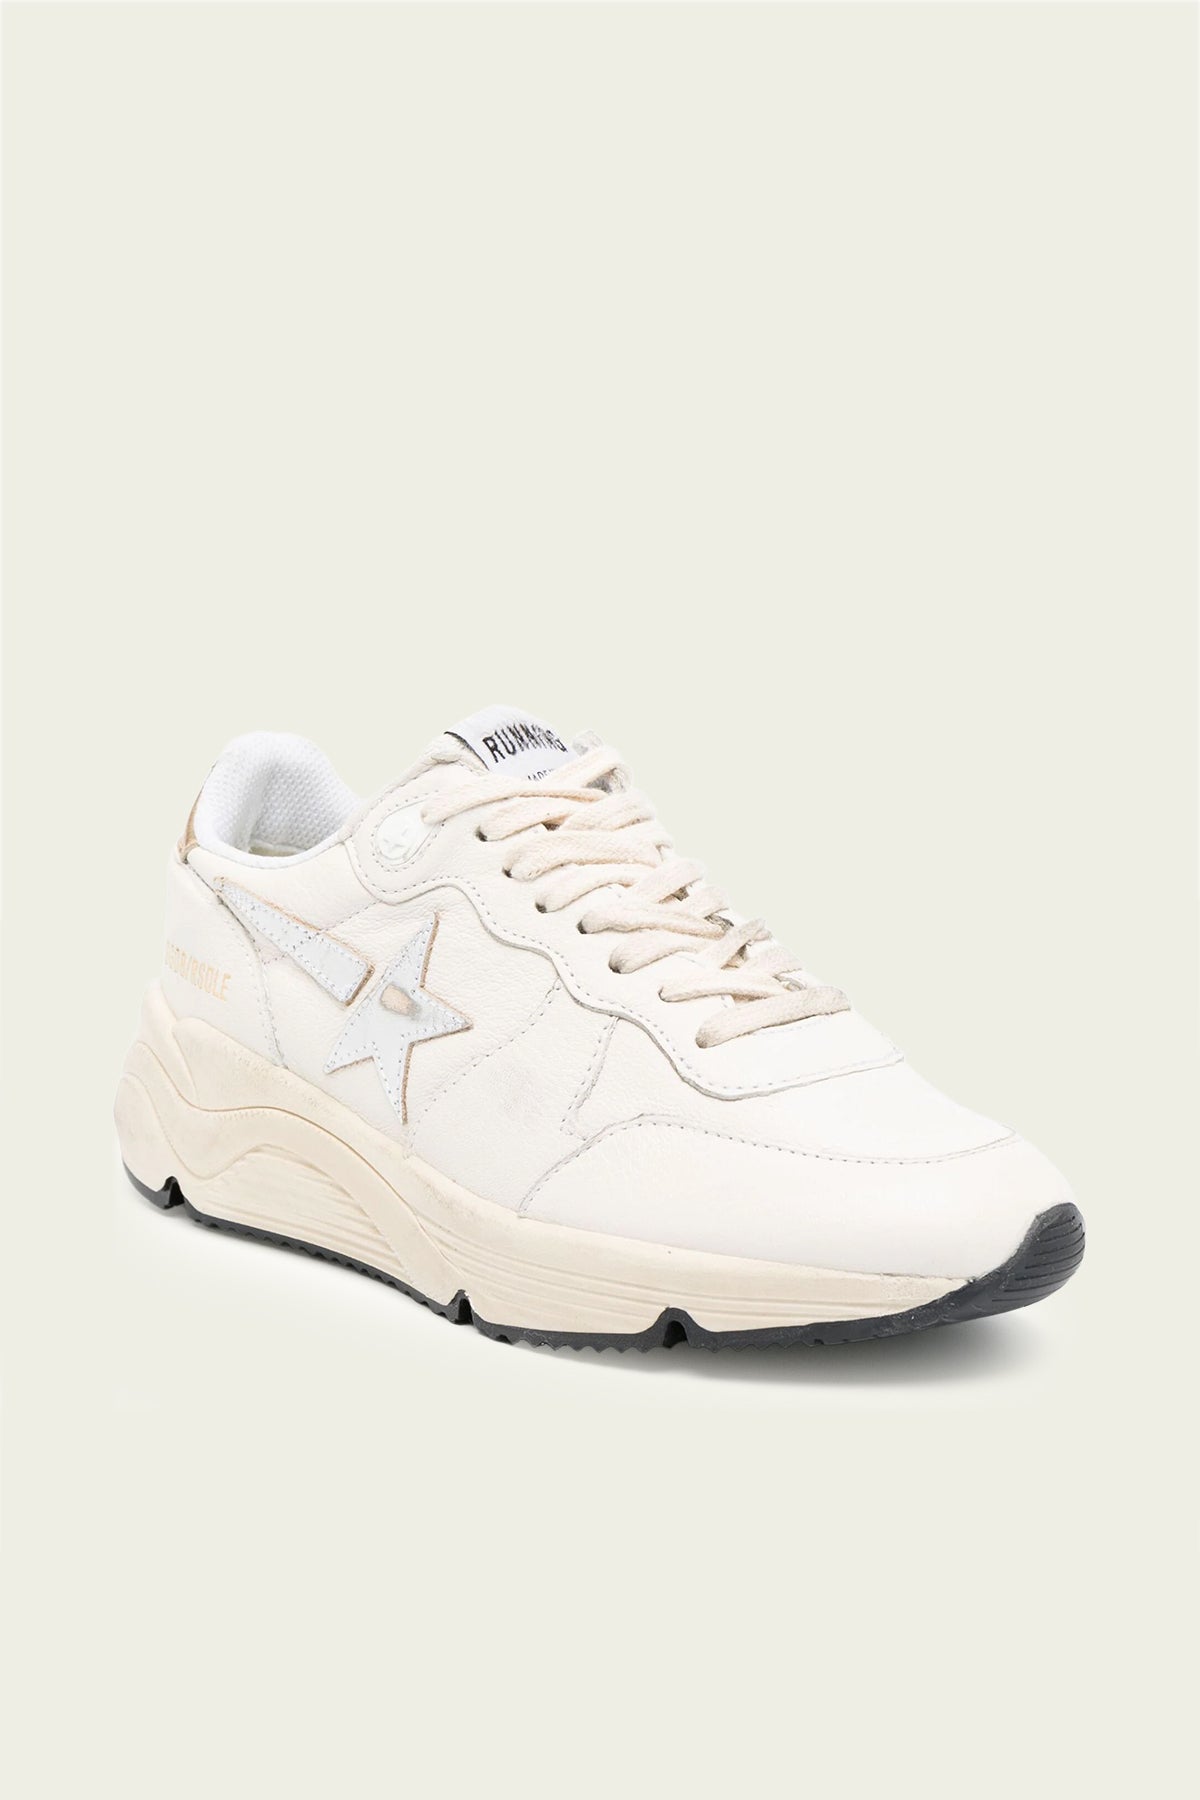 Running White Silver Nappa Leather Sneaker - shop-olivia.com